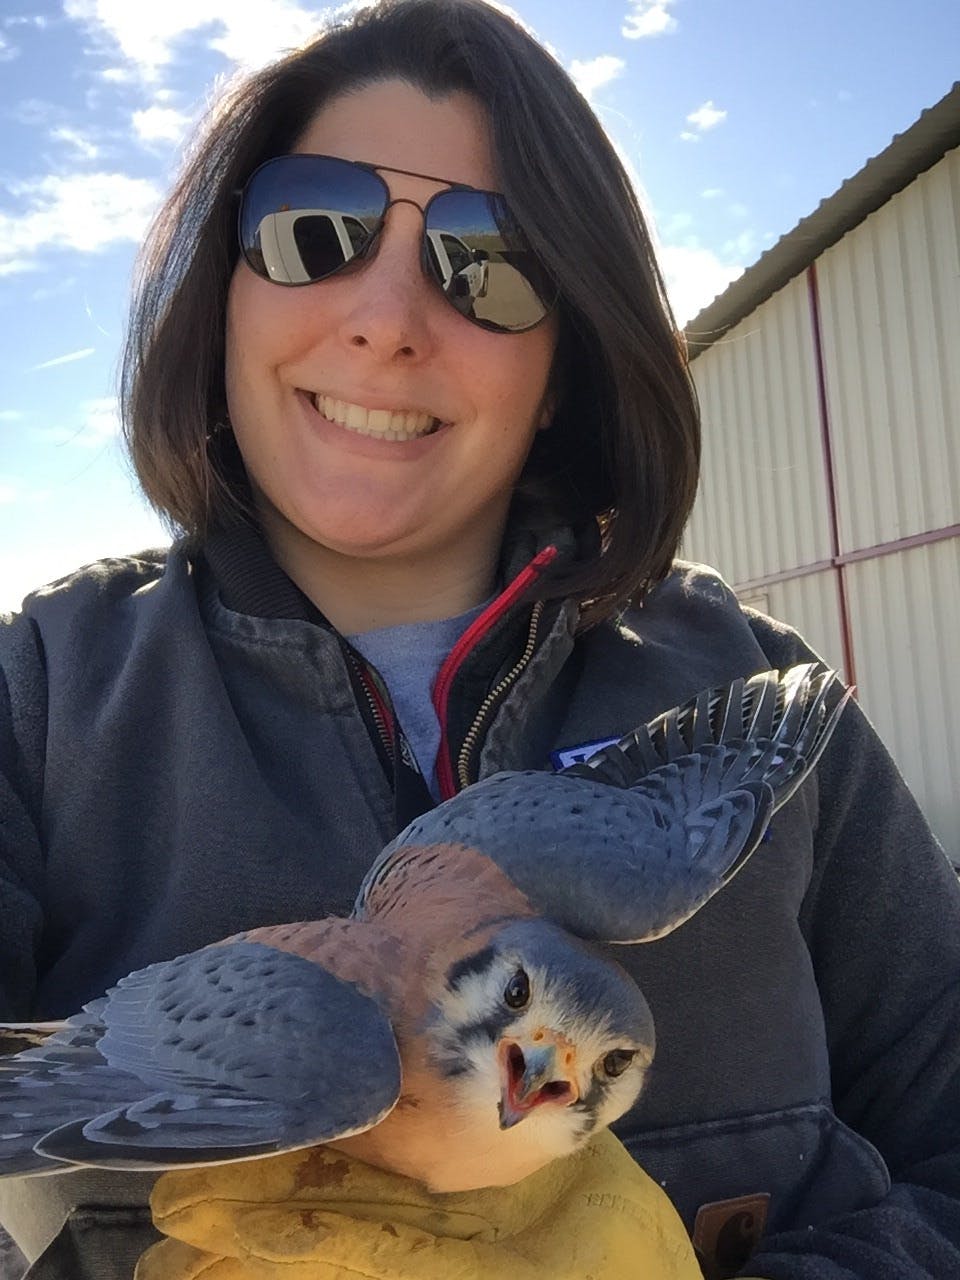 Airports provide a strong food source for American kestrels, so researchers are trying to find ways to deter them from using airfields as hunting grounds.